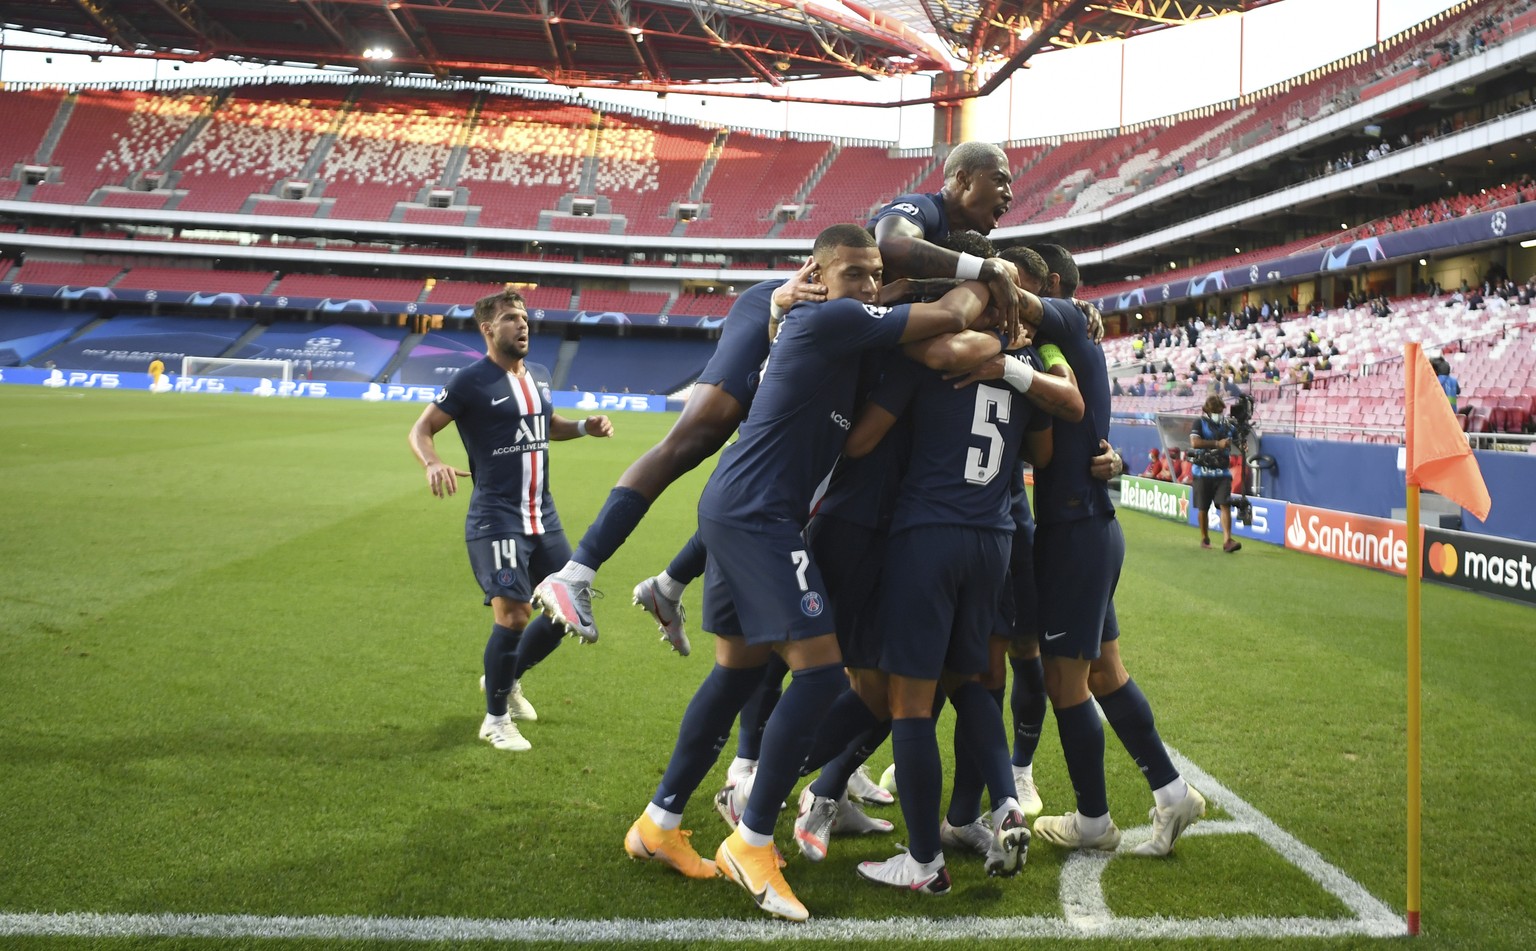 PSG&#039;s players celebrate after Marquinhos scored his side&#039;s first goal during the Champions League semifinal soccer match between RB Leipzig and Paris Saint-Germain at the Luz stadium in Lisb ...